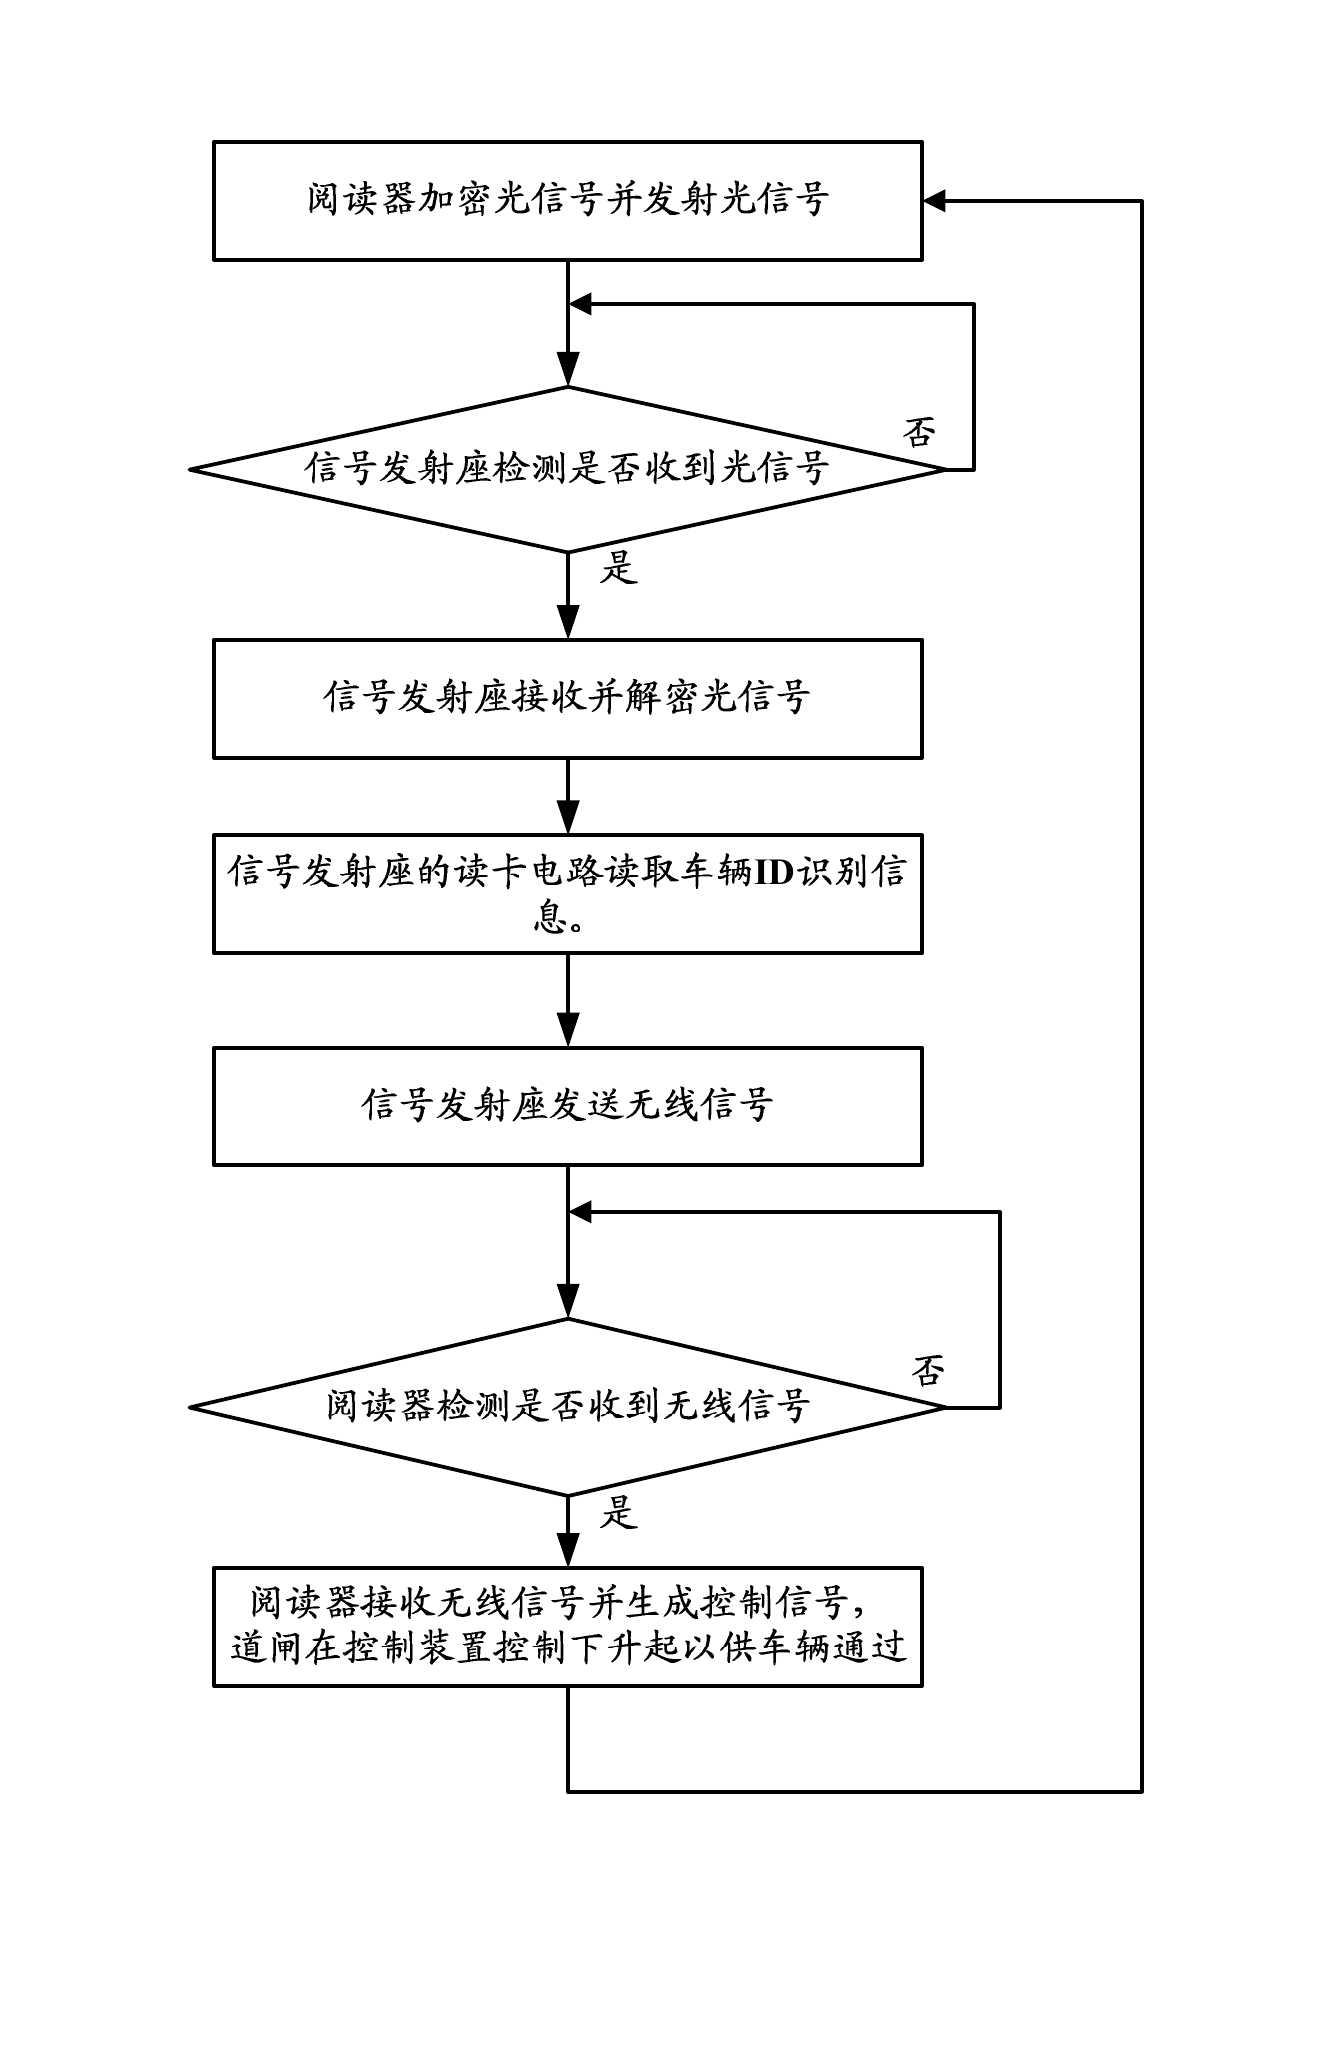 Vehicle access control system and vehicle access control method